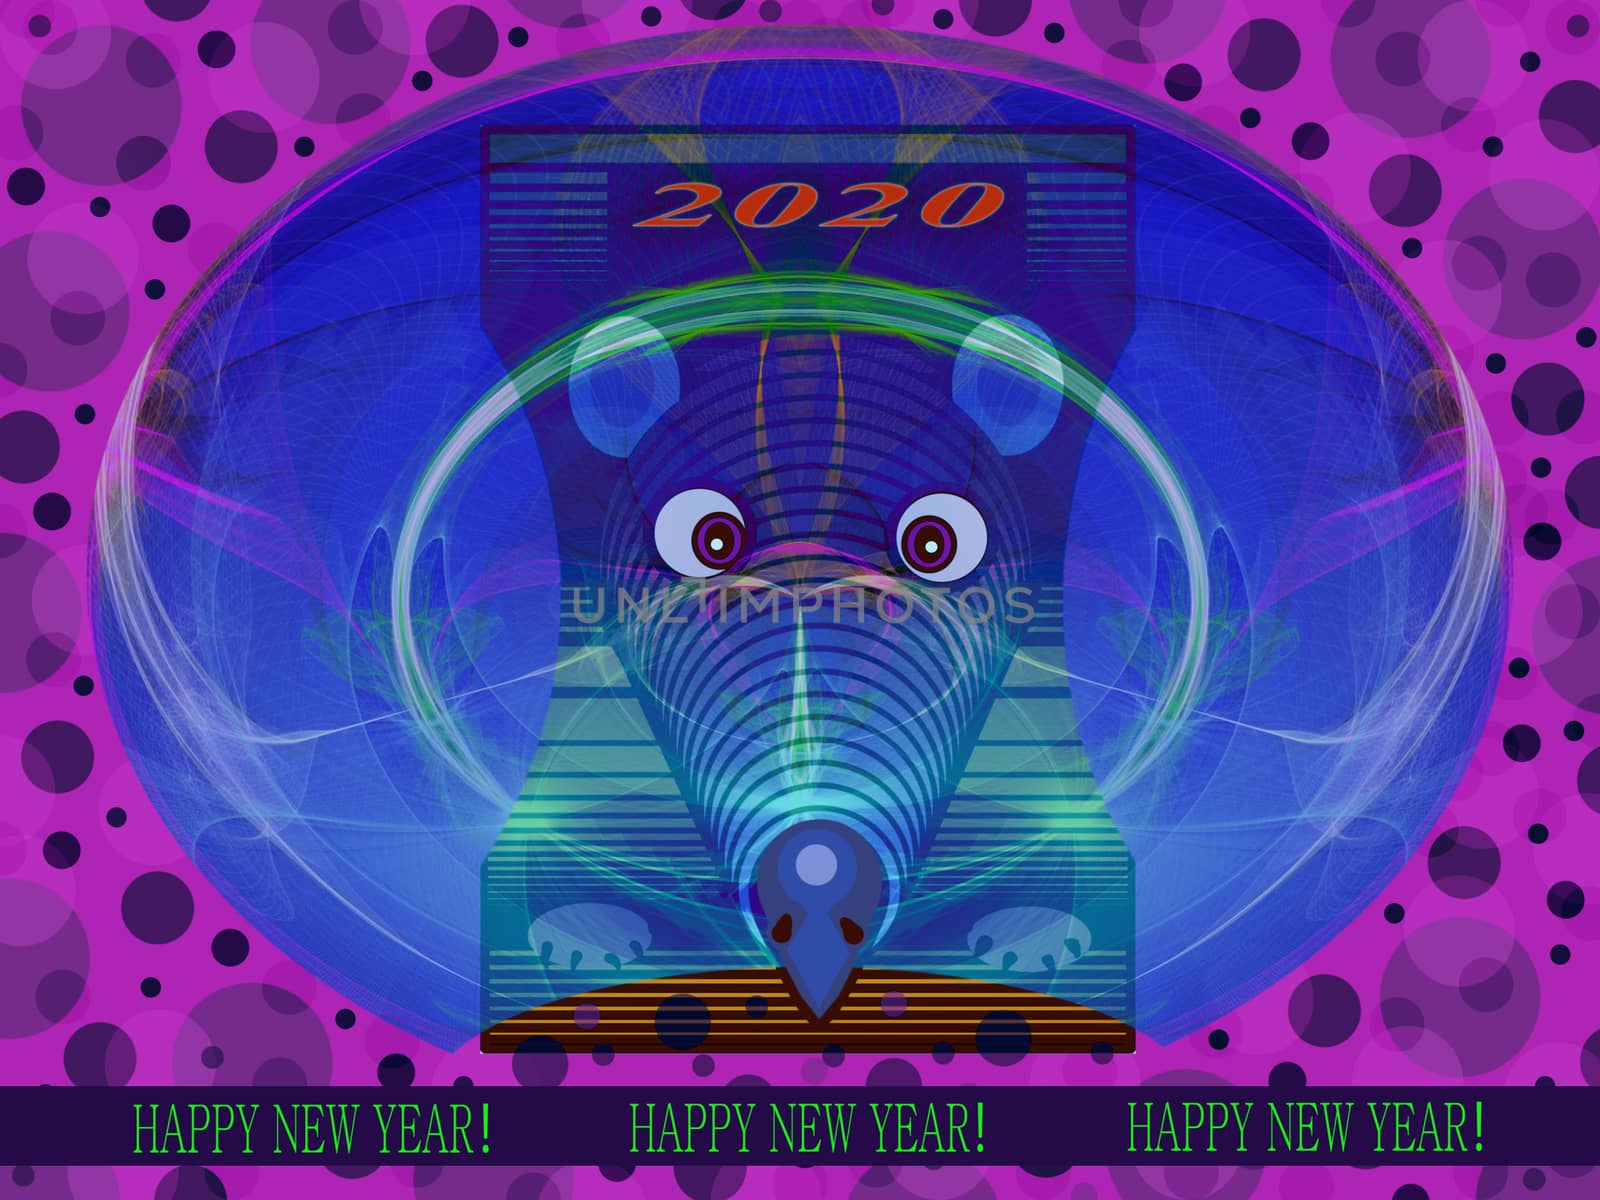 Rat flies in spaceship, this is the face of a new year that will come soon